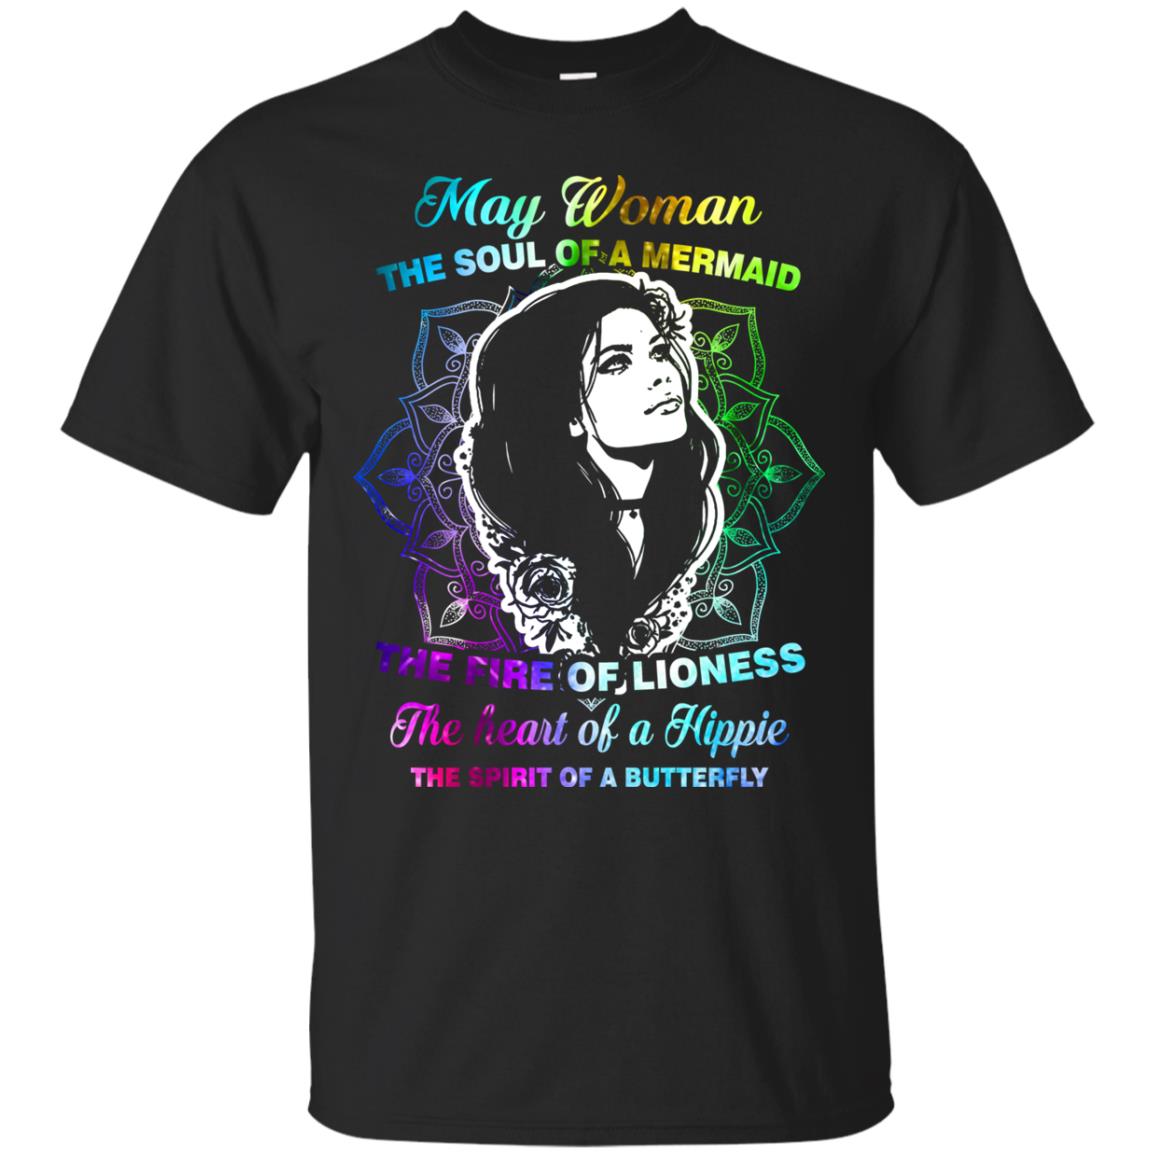 May Woman Shirt The Soul Of A Mermaid The Fire Of Lioness The Heart Of A Hippeie The Spirit Of A ButterflyG200 Gildan Ultra Cotton T-Shirt